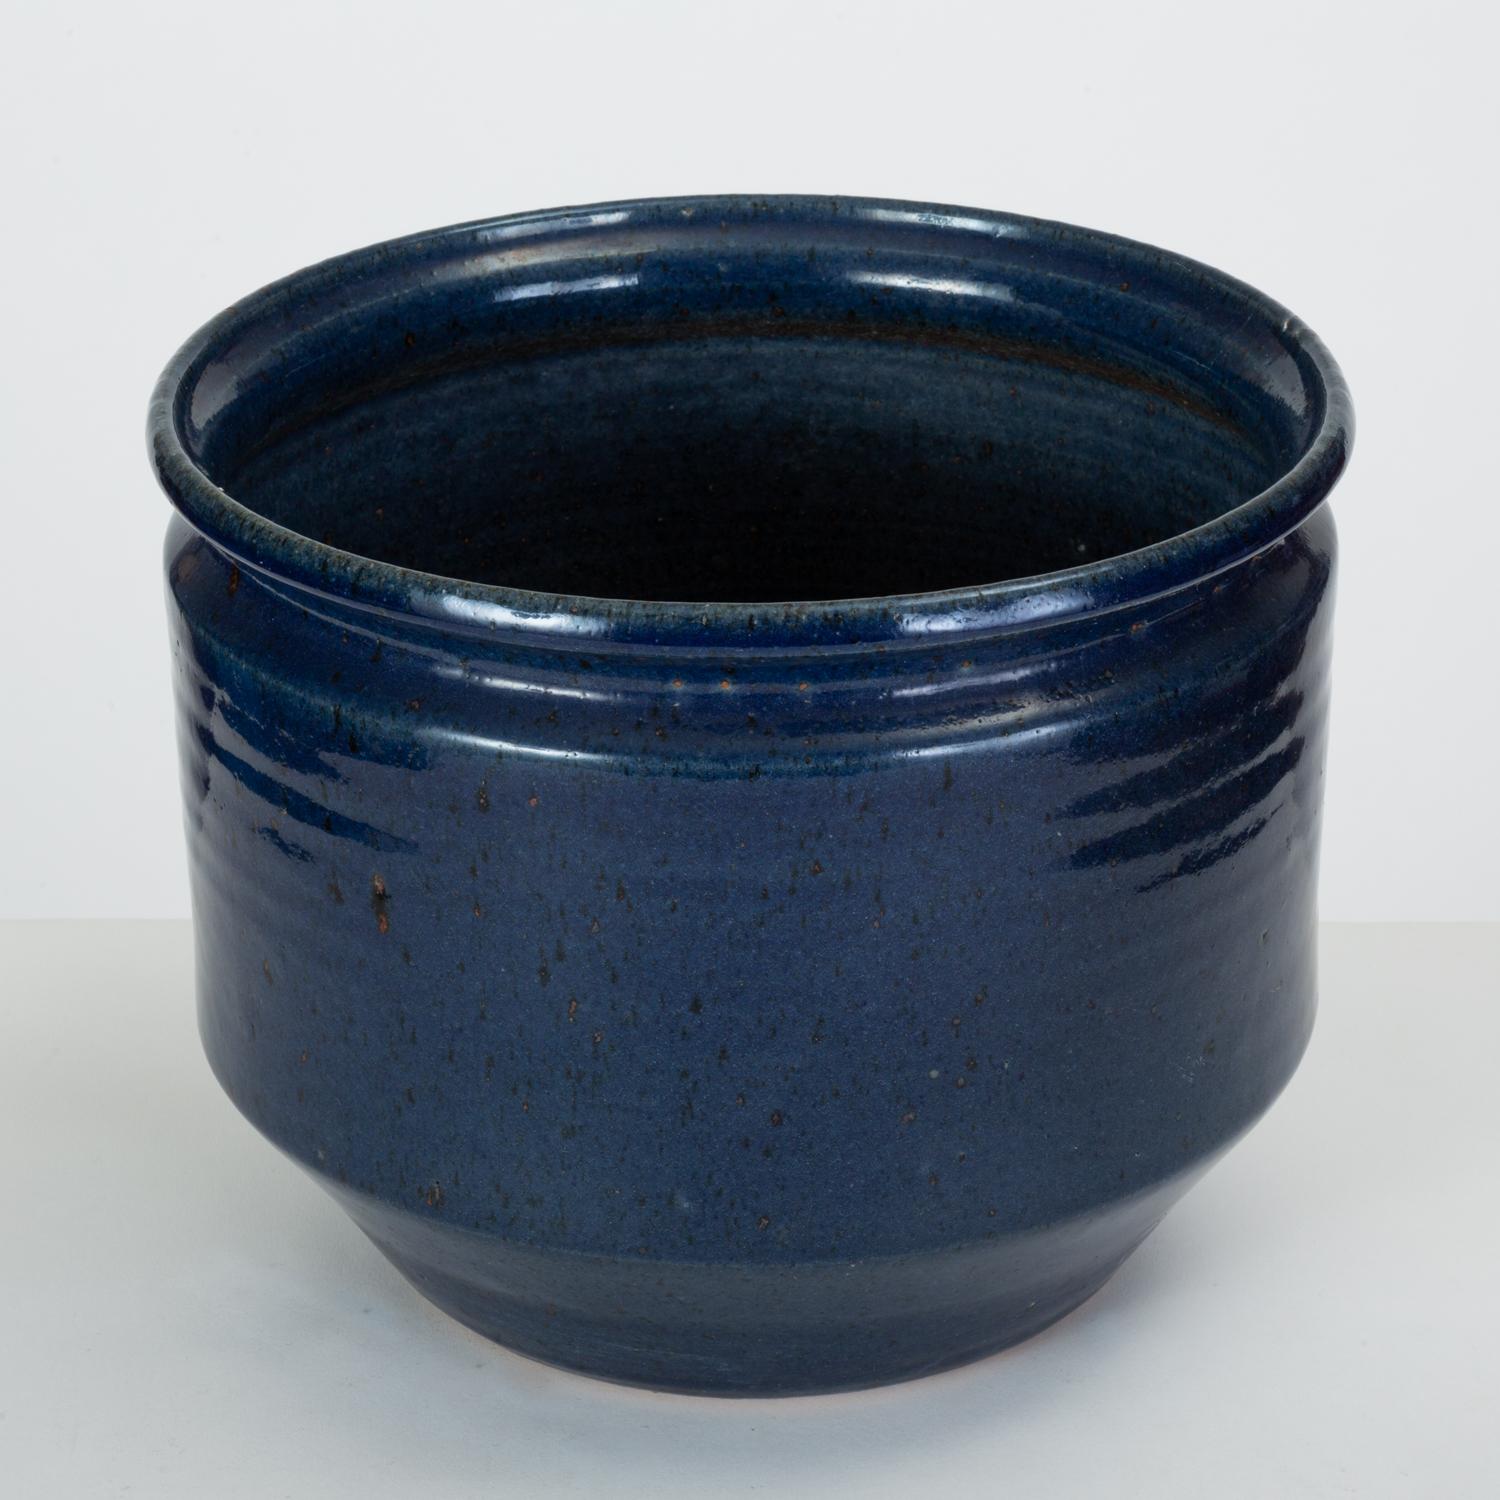 Pair of Blue-Glazed Earthgender Bowl Planters, David Cressey and Robert Maxwell 1